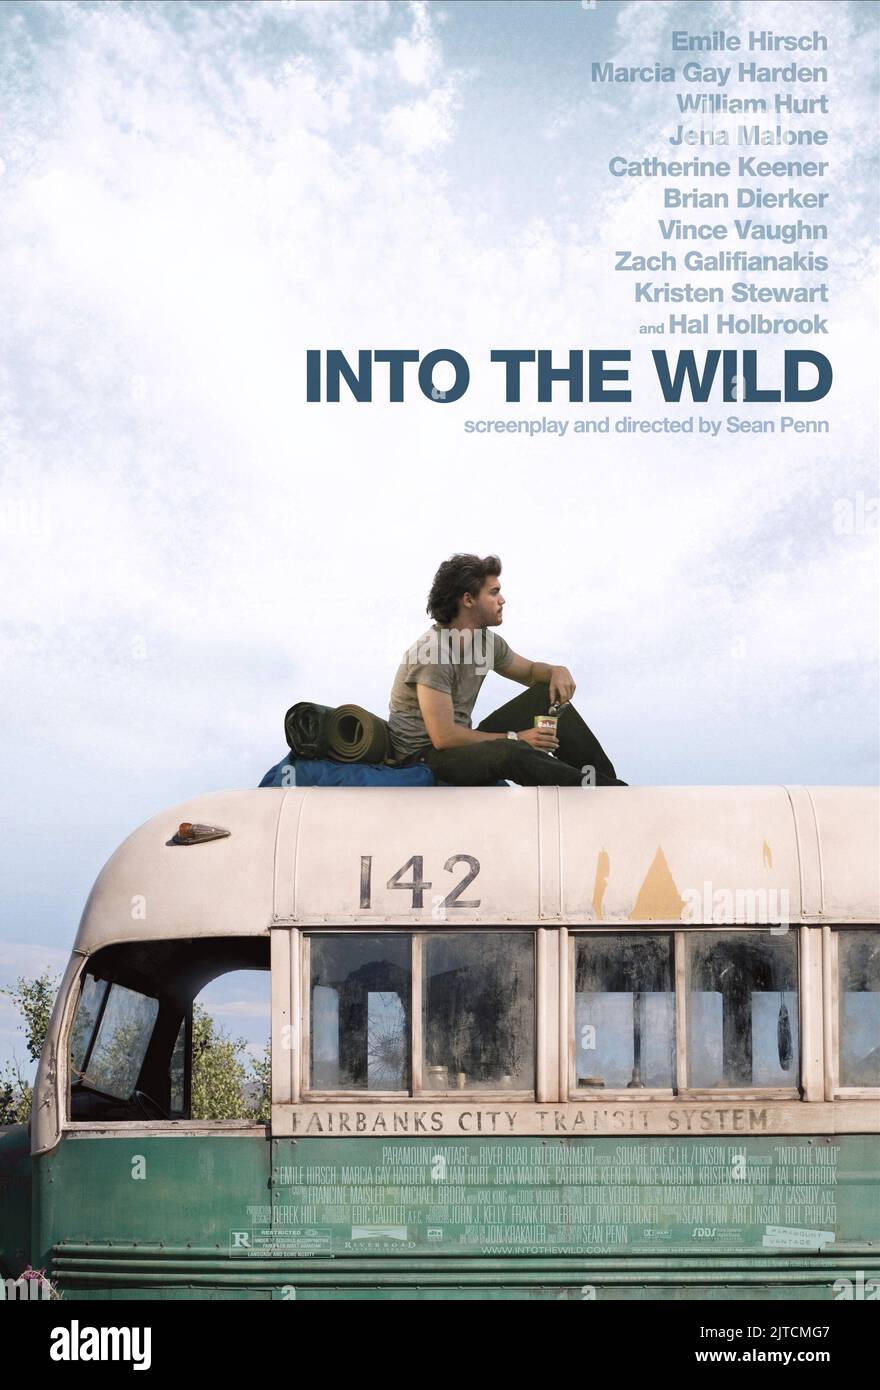 EMILE HIRSCH POSTER, INTO THE WILD, 2007 Stock Photo